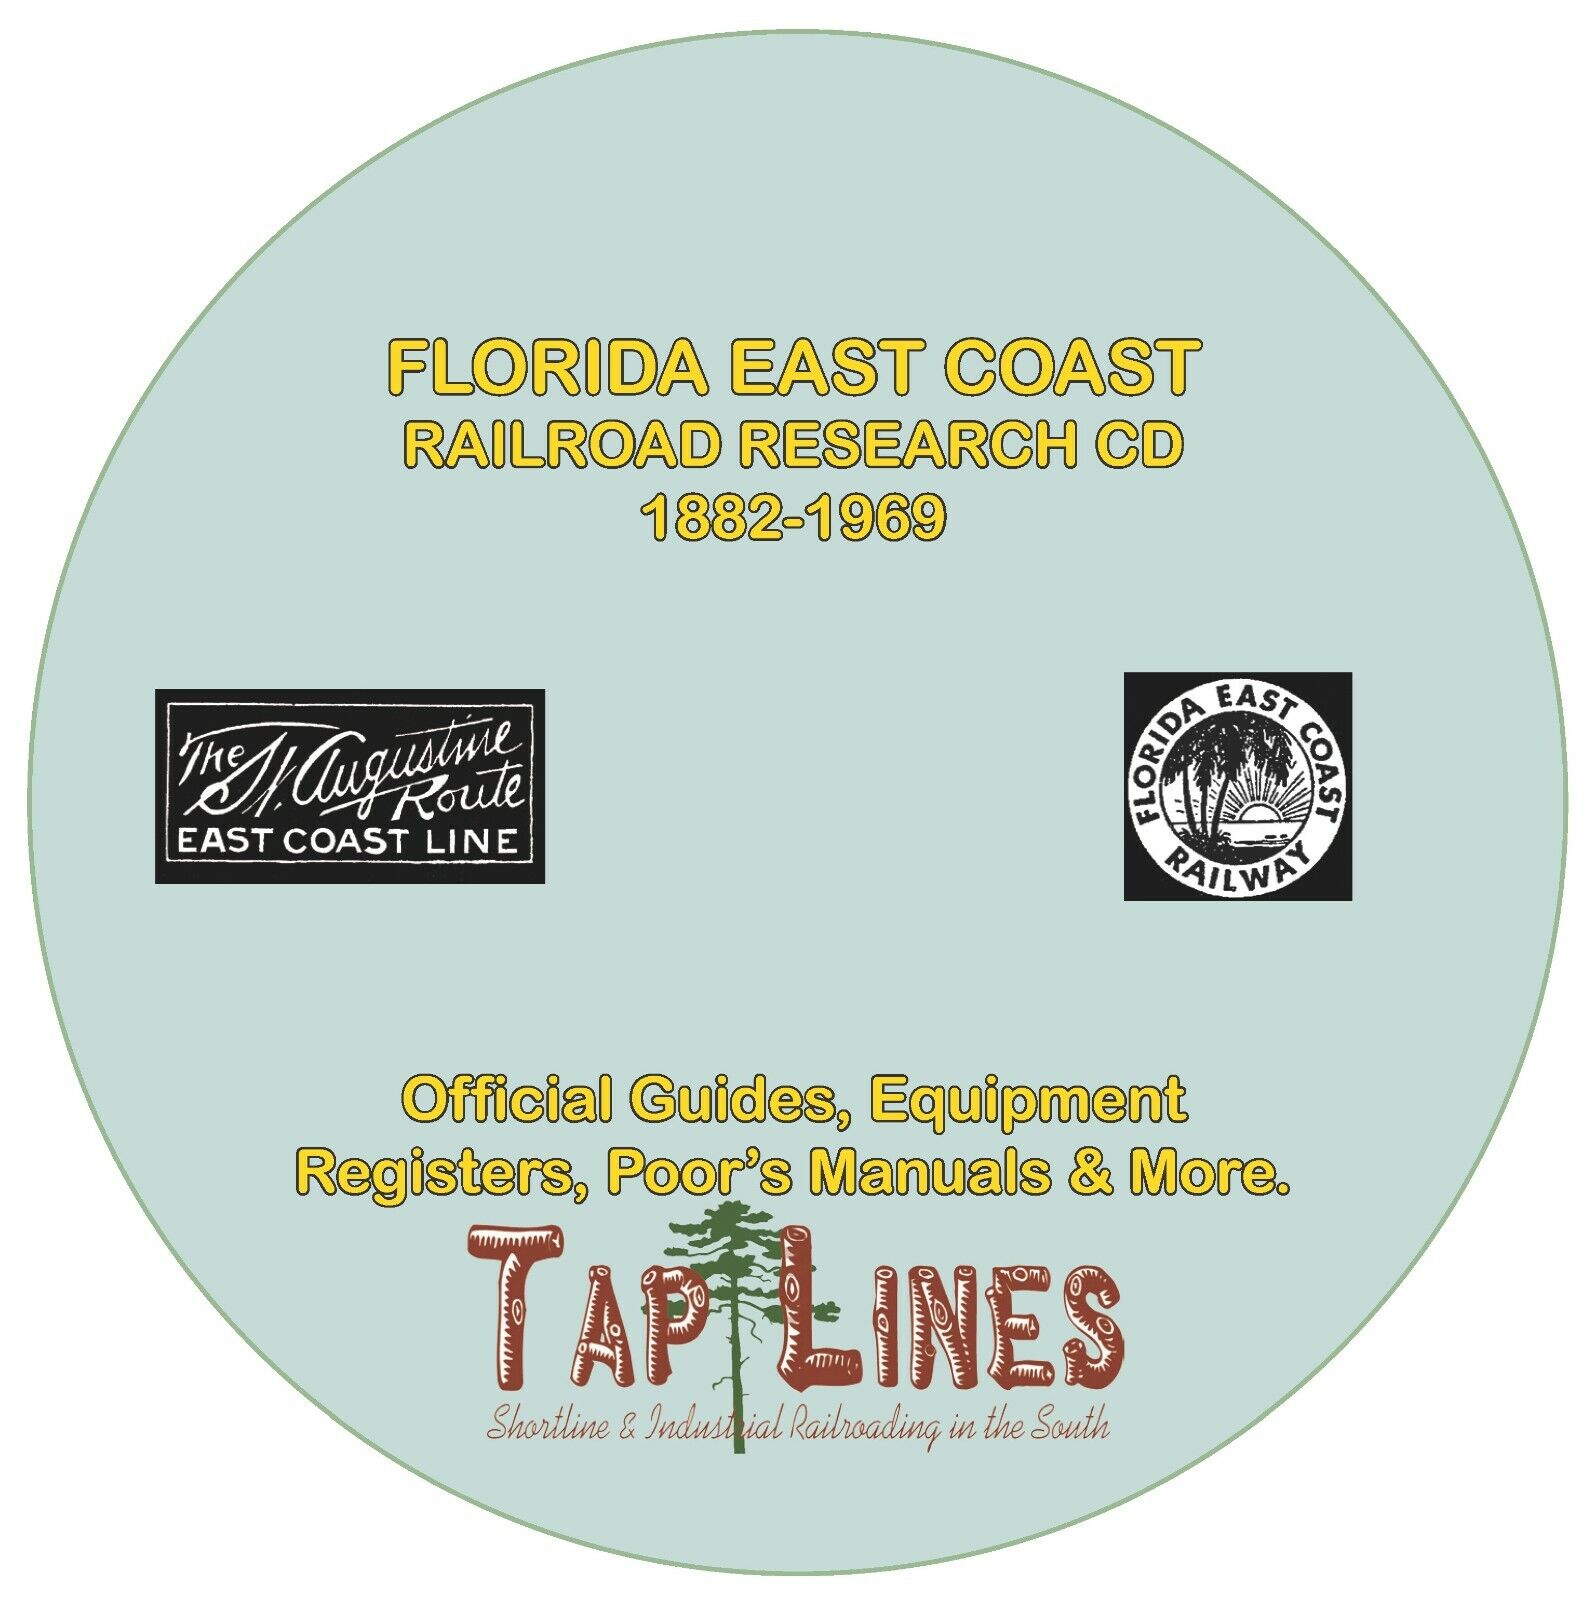 FLORIDA EAST COAST OFFICIAL GUIDES, EQUIPMENT REGISTERS & RESEARCH SCANNED TO CD